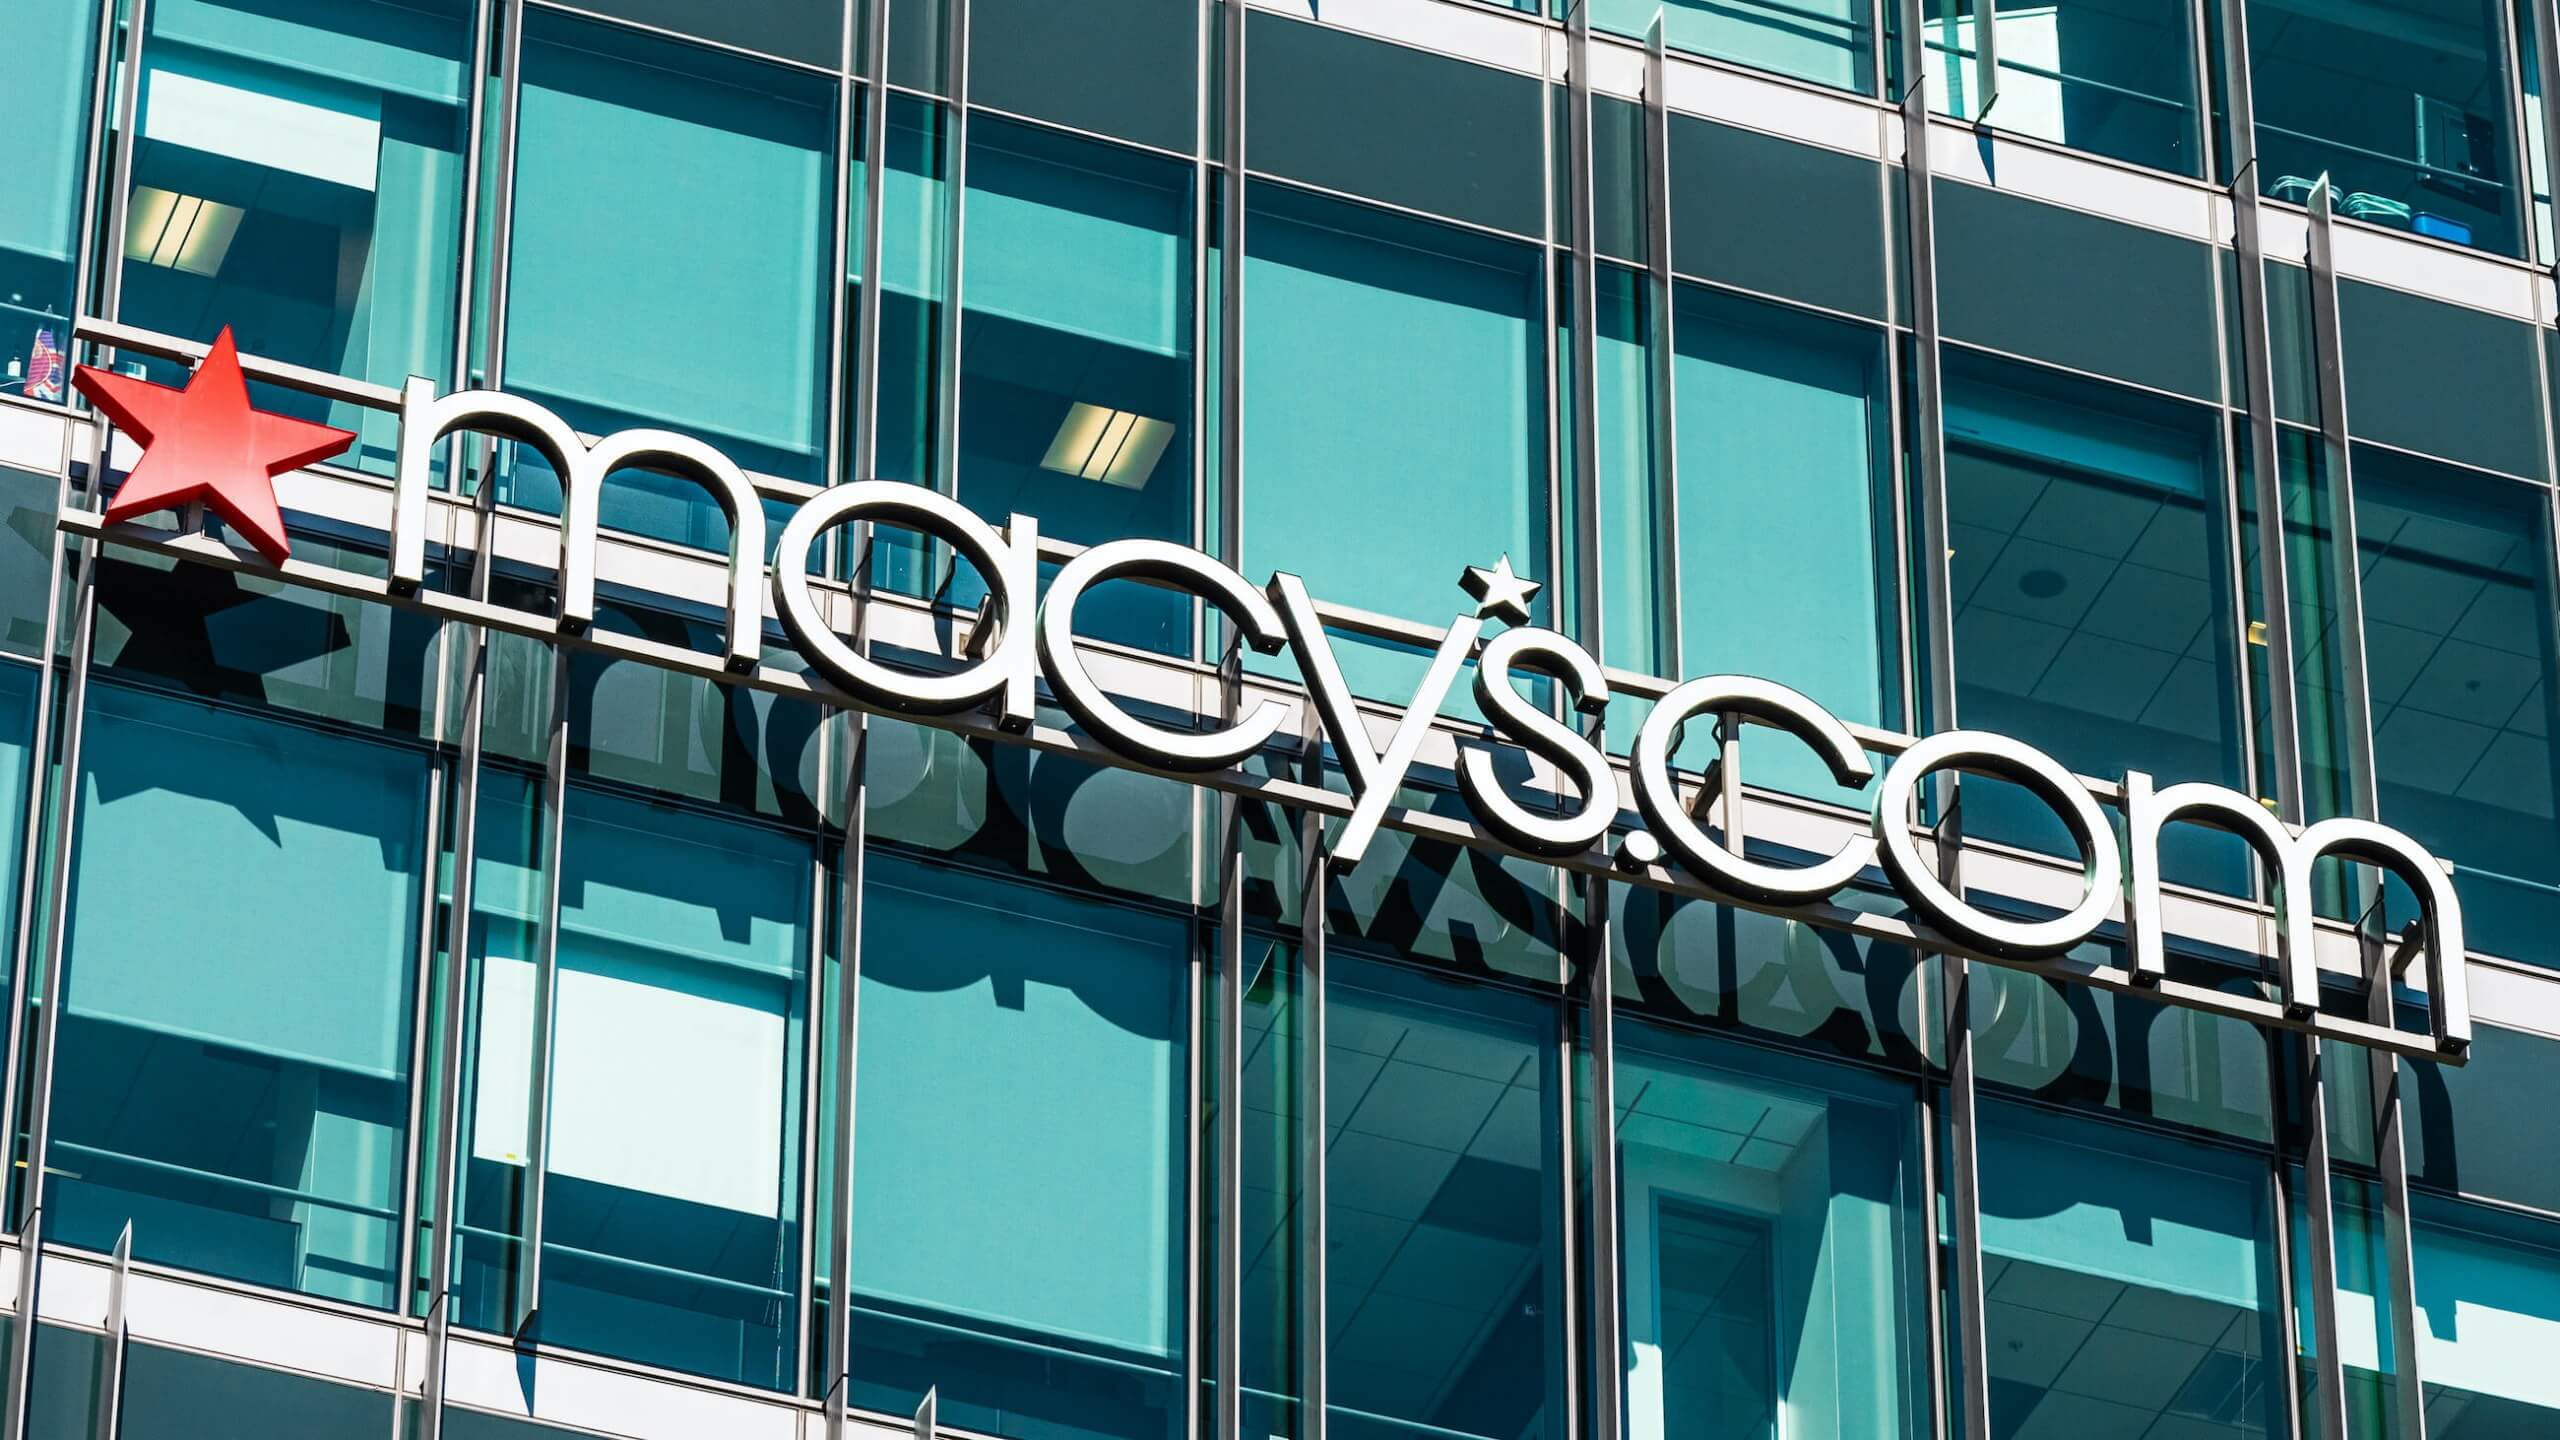 Macy's suffers credit card data breach for the second year in a row